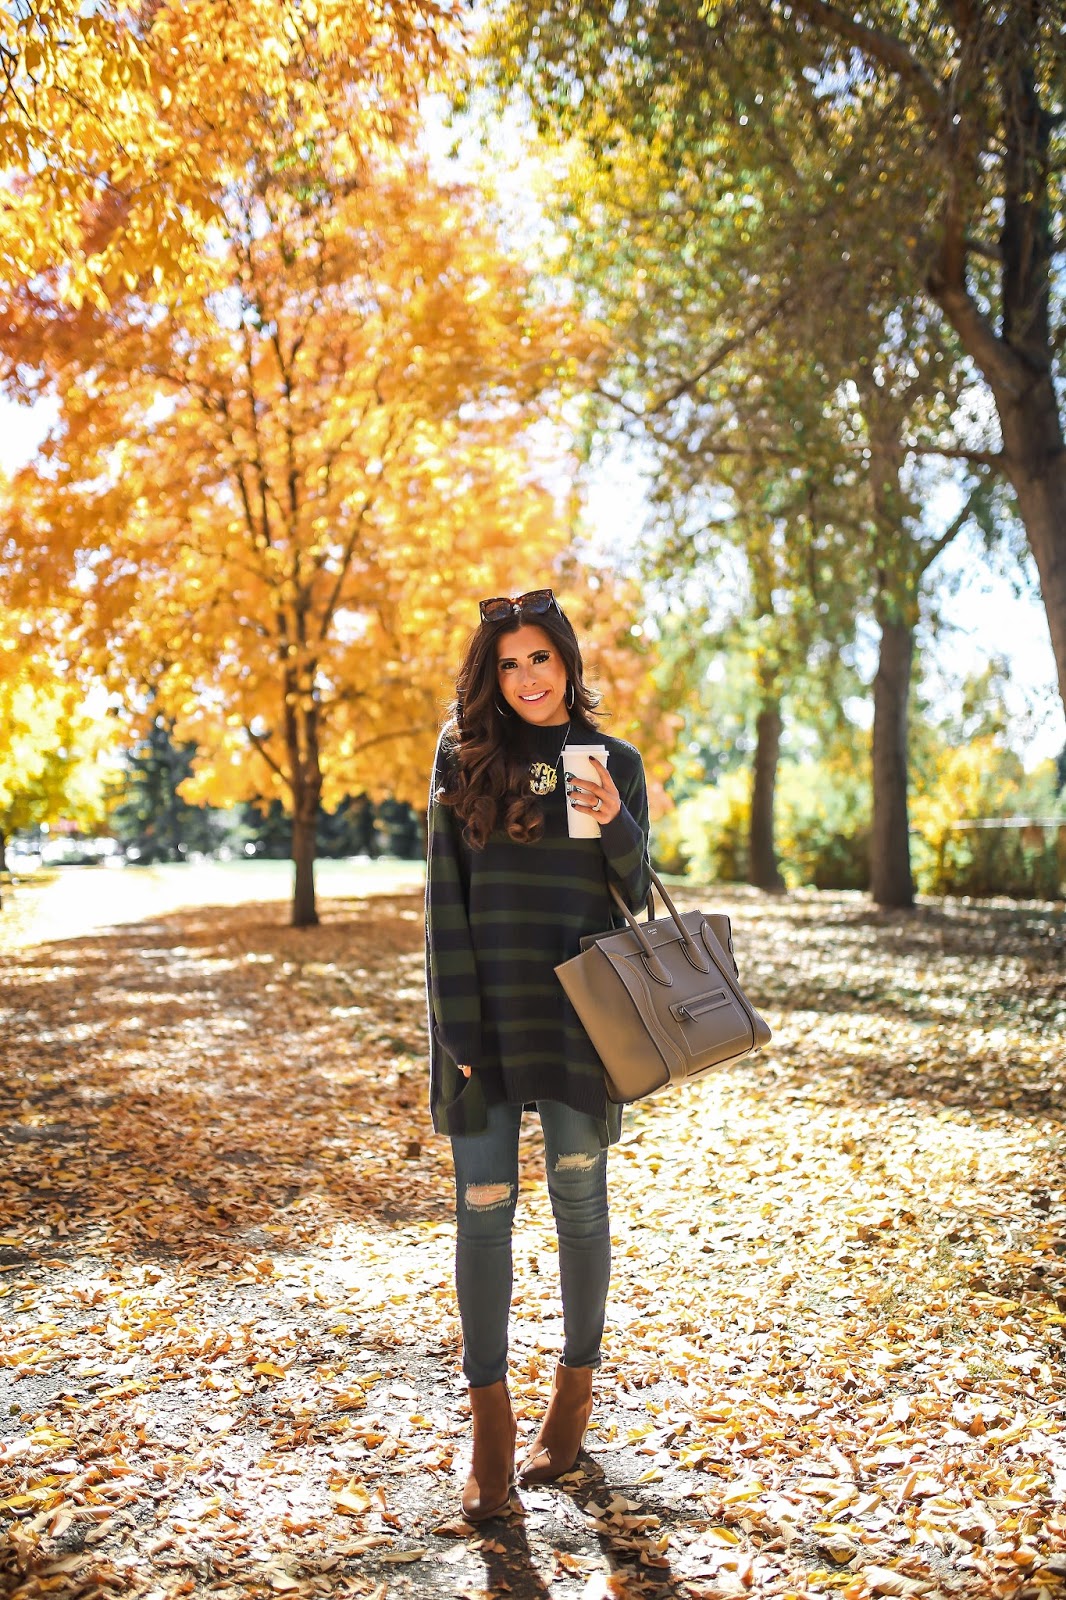 Emily Gemma, The sweetest thing blog, BP striped oversized sweater nordstrom, AG ripped skinny jeans, celine mini luggage in taupe. celine sunglasses catherine in tortoise, Blake sam edelman booties, david yurman gold albion ring pink stone, oversized gold monogram necklace, love always monogram necklace, Nordstrom skinny jeans with rips, nordstrom fall sweaters, nordstrom brown booties, best brown booties for fall 2016, cutest brown booties for fall, how to style brown booties for fall, pinterest fall fashion 2016, pinterest fall outfits, pinterest fall OOTDs, popular travel bloggers, travel bloggers in Denver, emilyanngemma, pinterest fall fashion, fall outfit ideas, fall outfit inspiration with booties pinterest